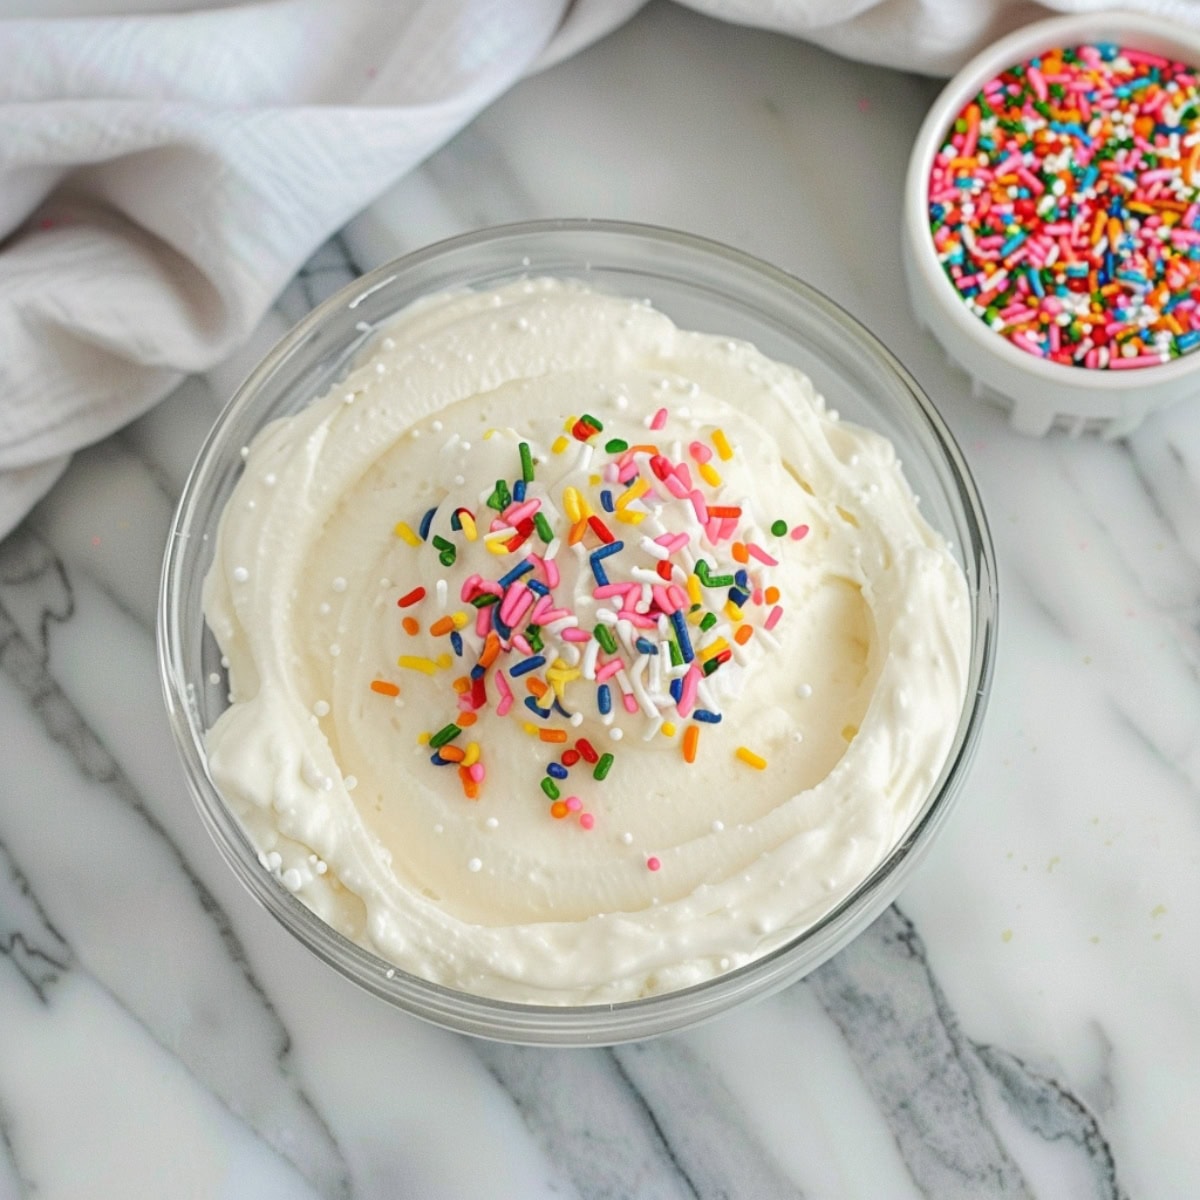 A glass bowl of funfetti cake dip with rainbow sprinkles on the side.